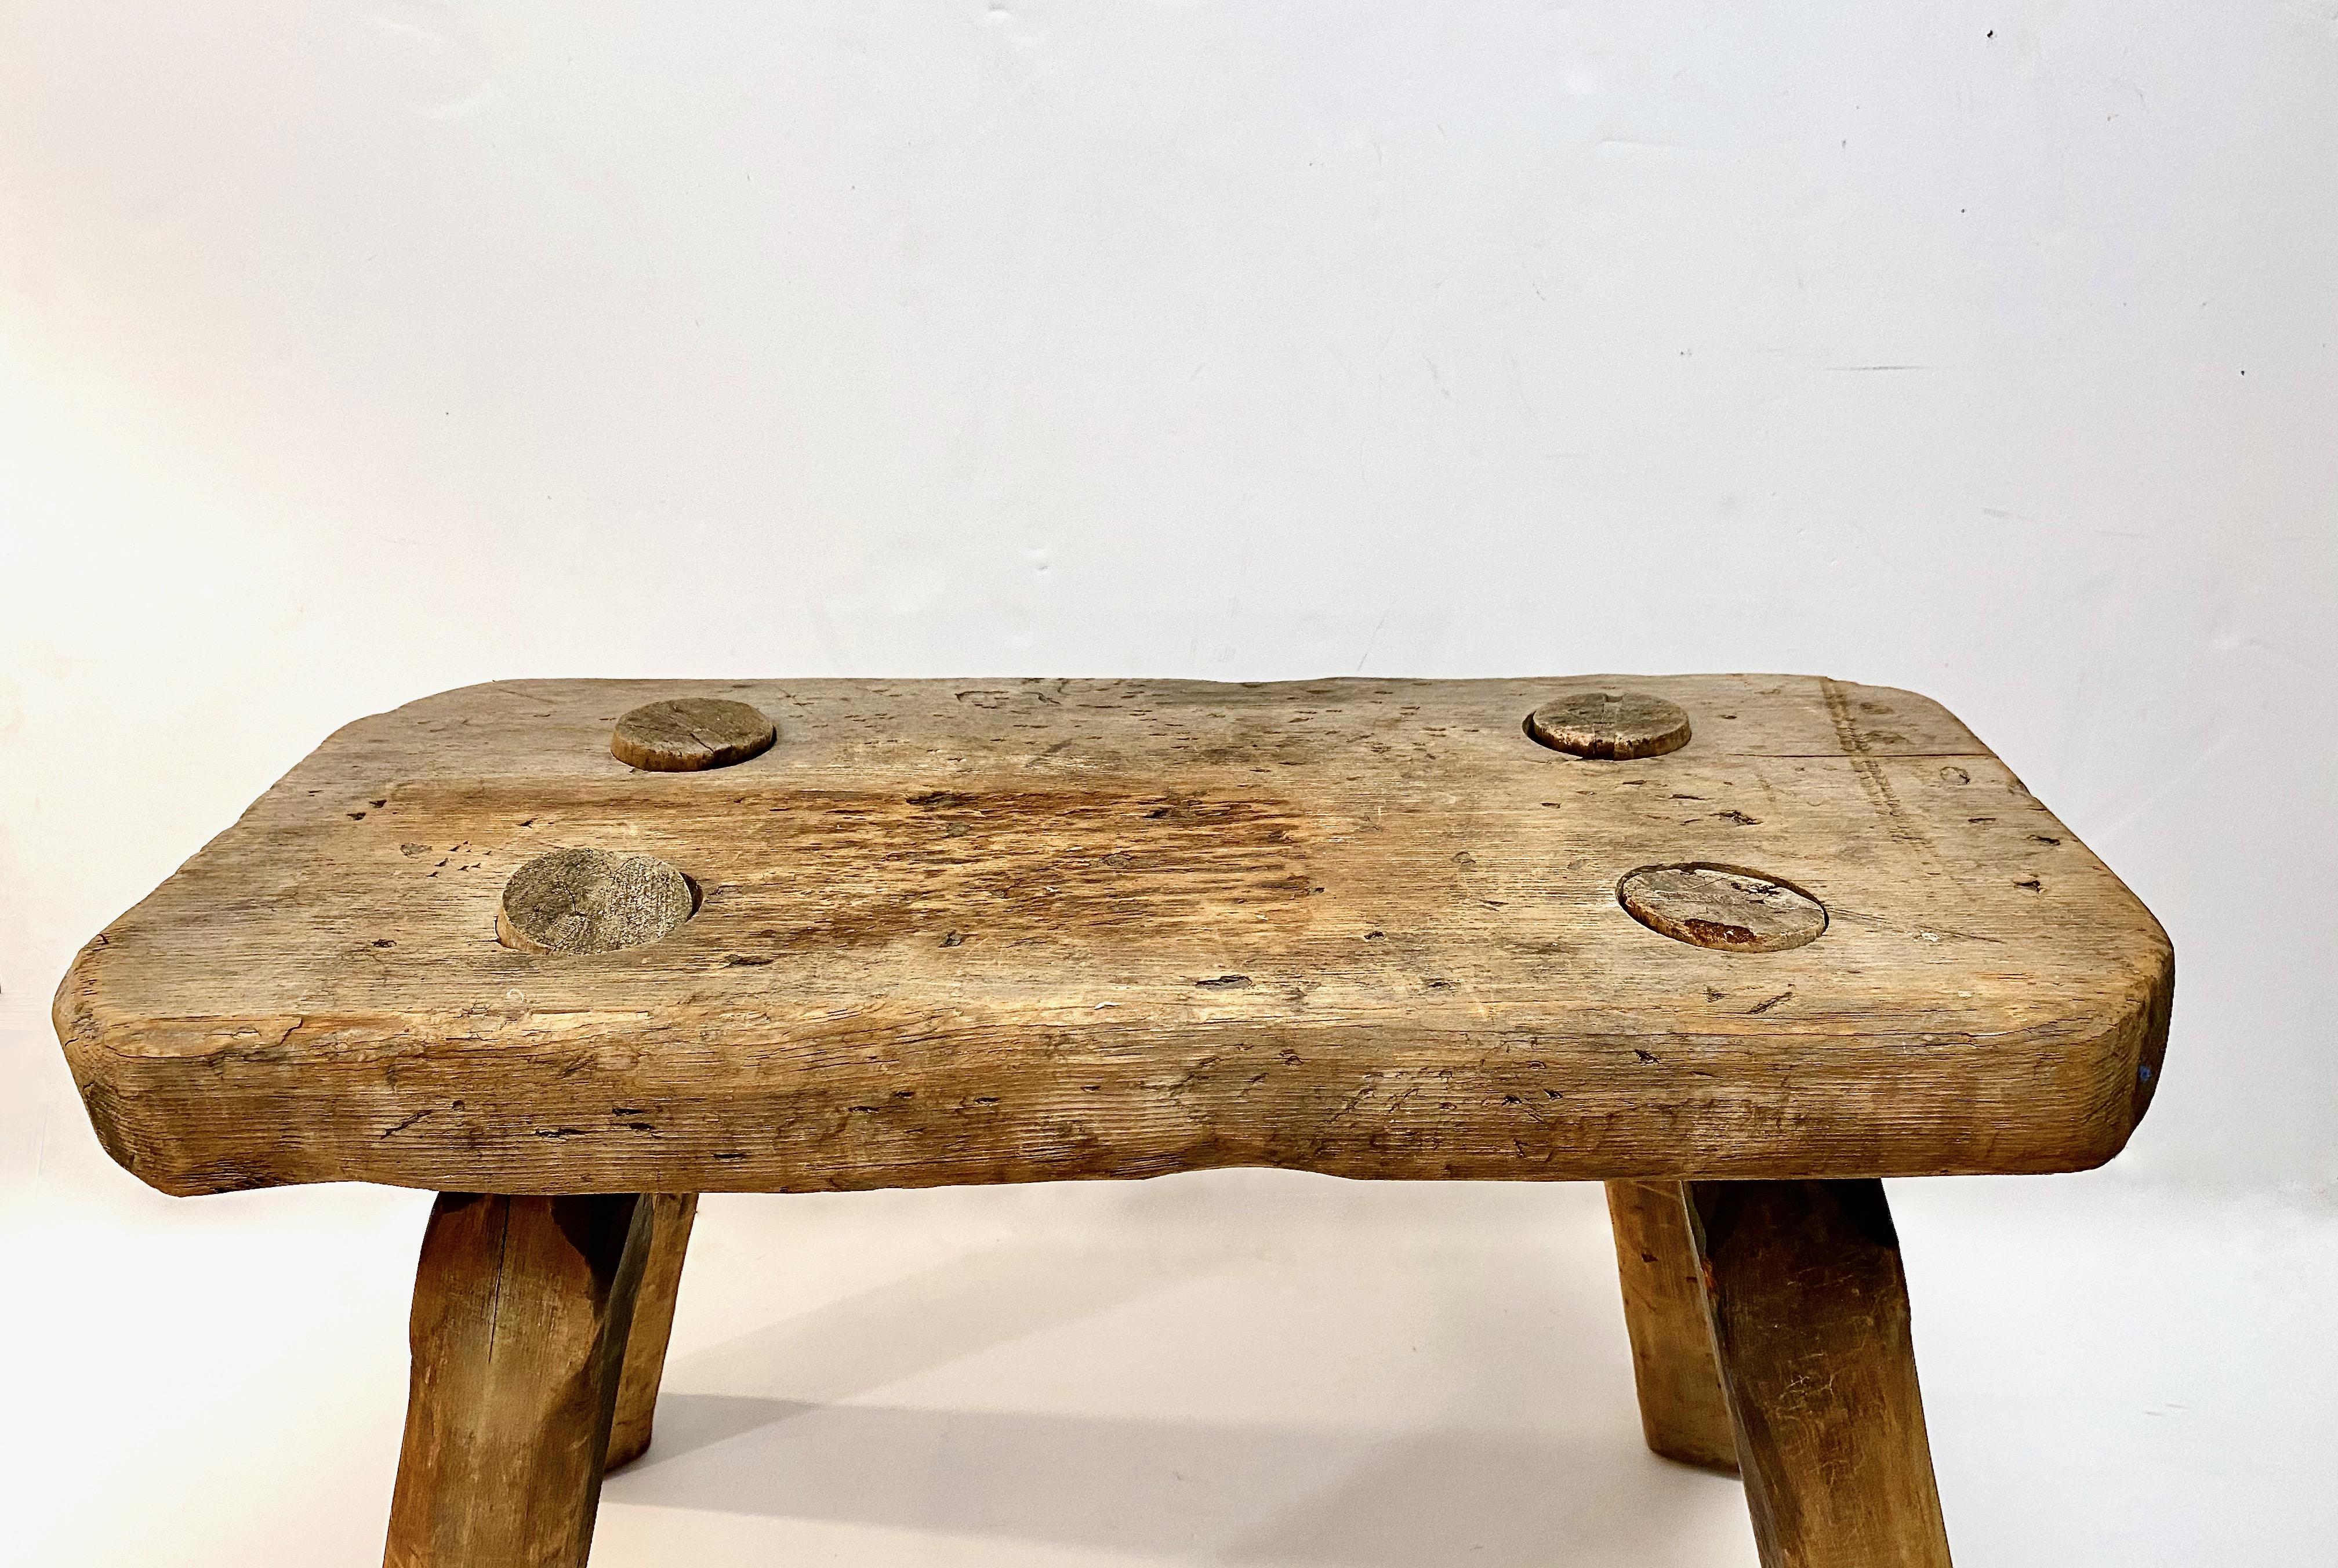 This is a charming rustic 19th century stool. Judging from the scraped surface, the stool is most probably Swedish or Nordic in origin. It is in overall very good condition considering its age and use. This piece would add just the right extra